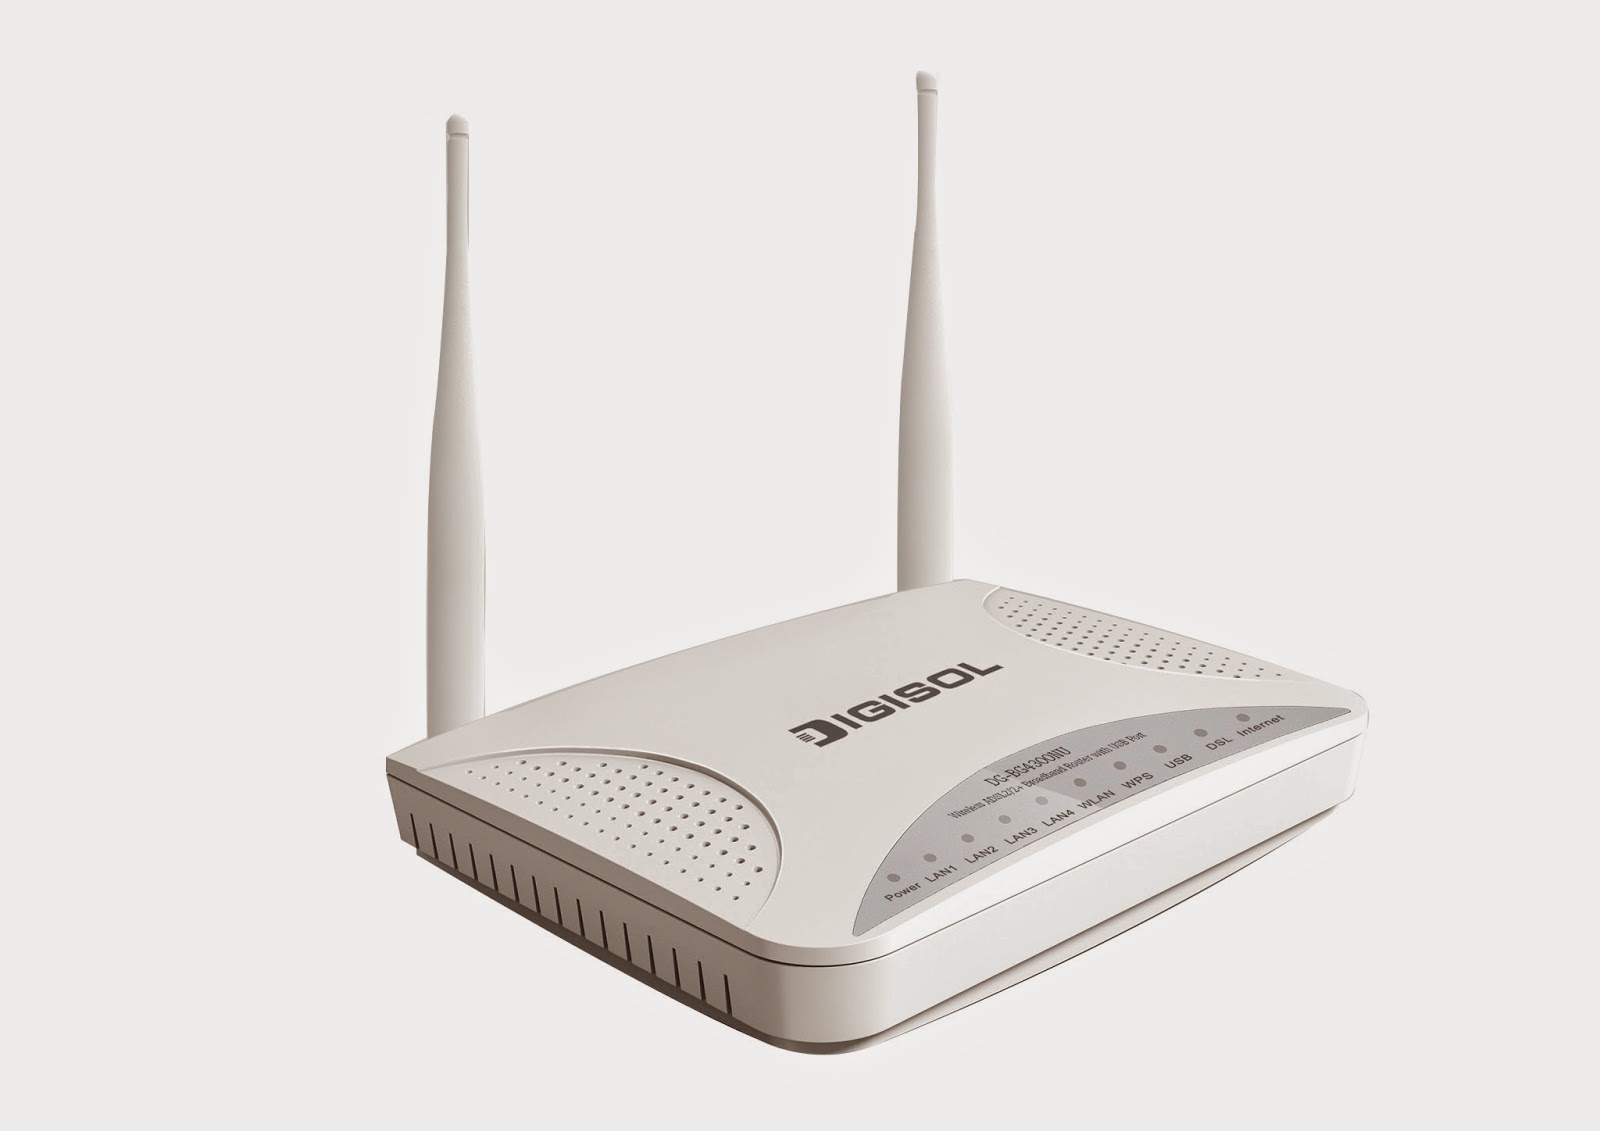 Digisol 300Mbps Wireless ADSL + USB 3G Router (DG-BG4300NU) Price, Specification & Unboxing